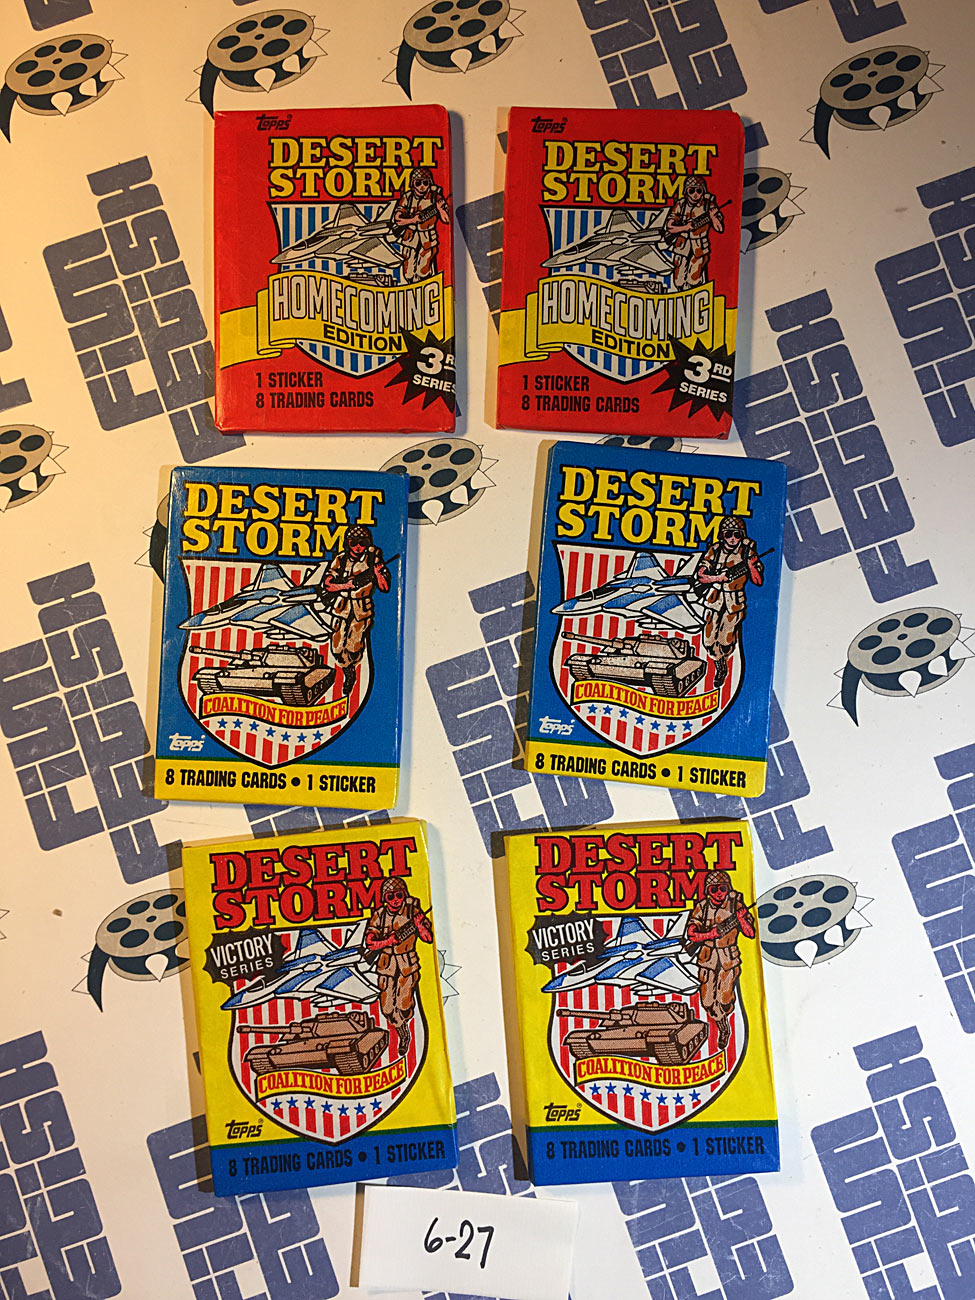 Set of 6 Sealed Topps Desert Storm Trading Card Wax Packs, Homecoming, Coalition For Peace, Victory Series [627]